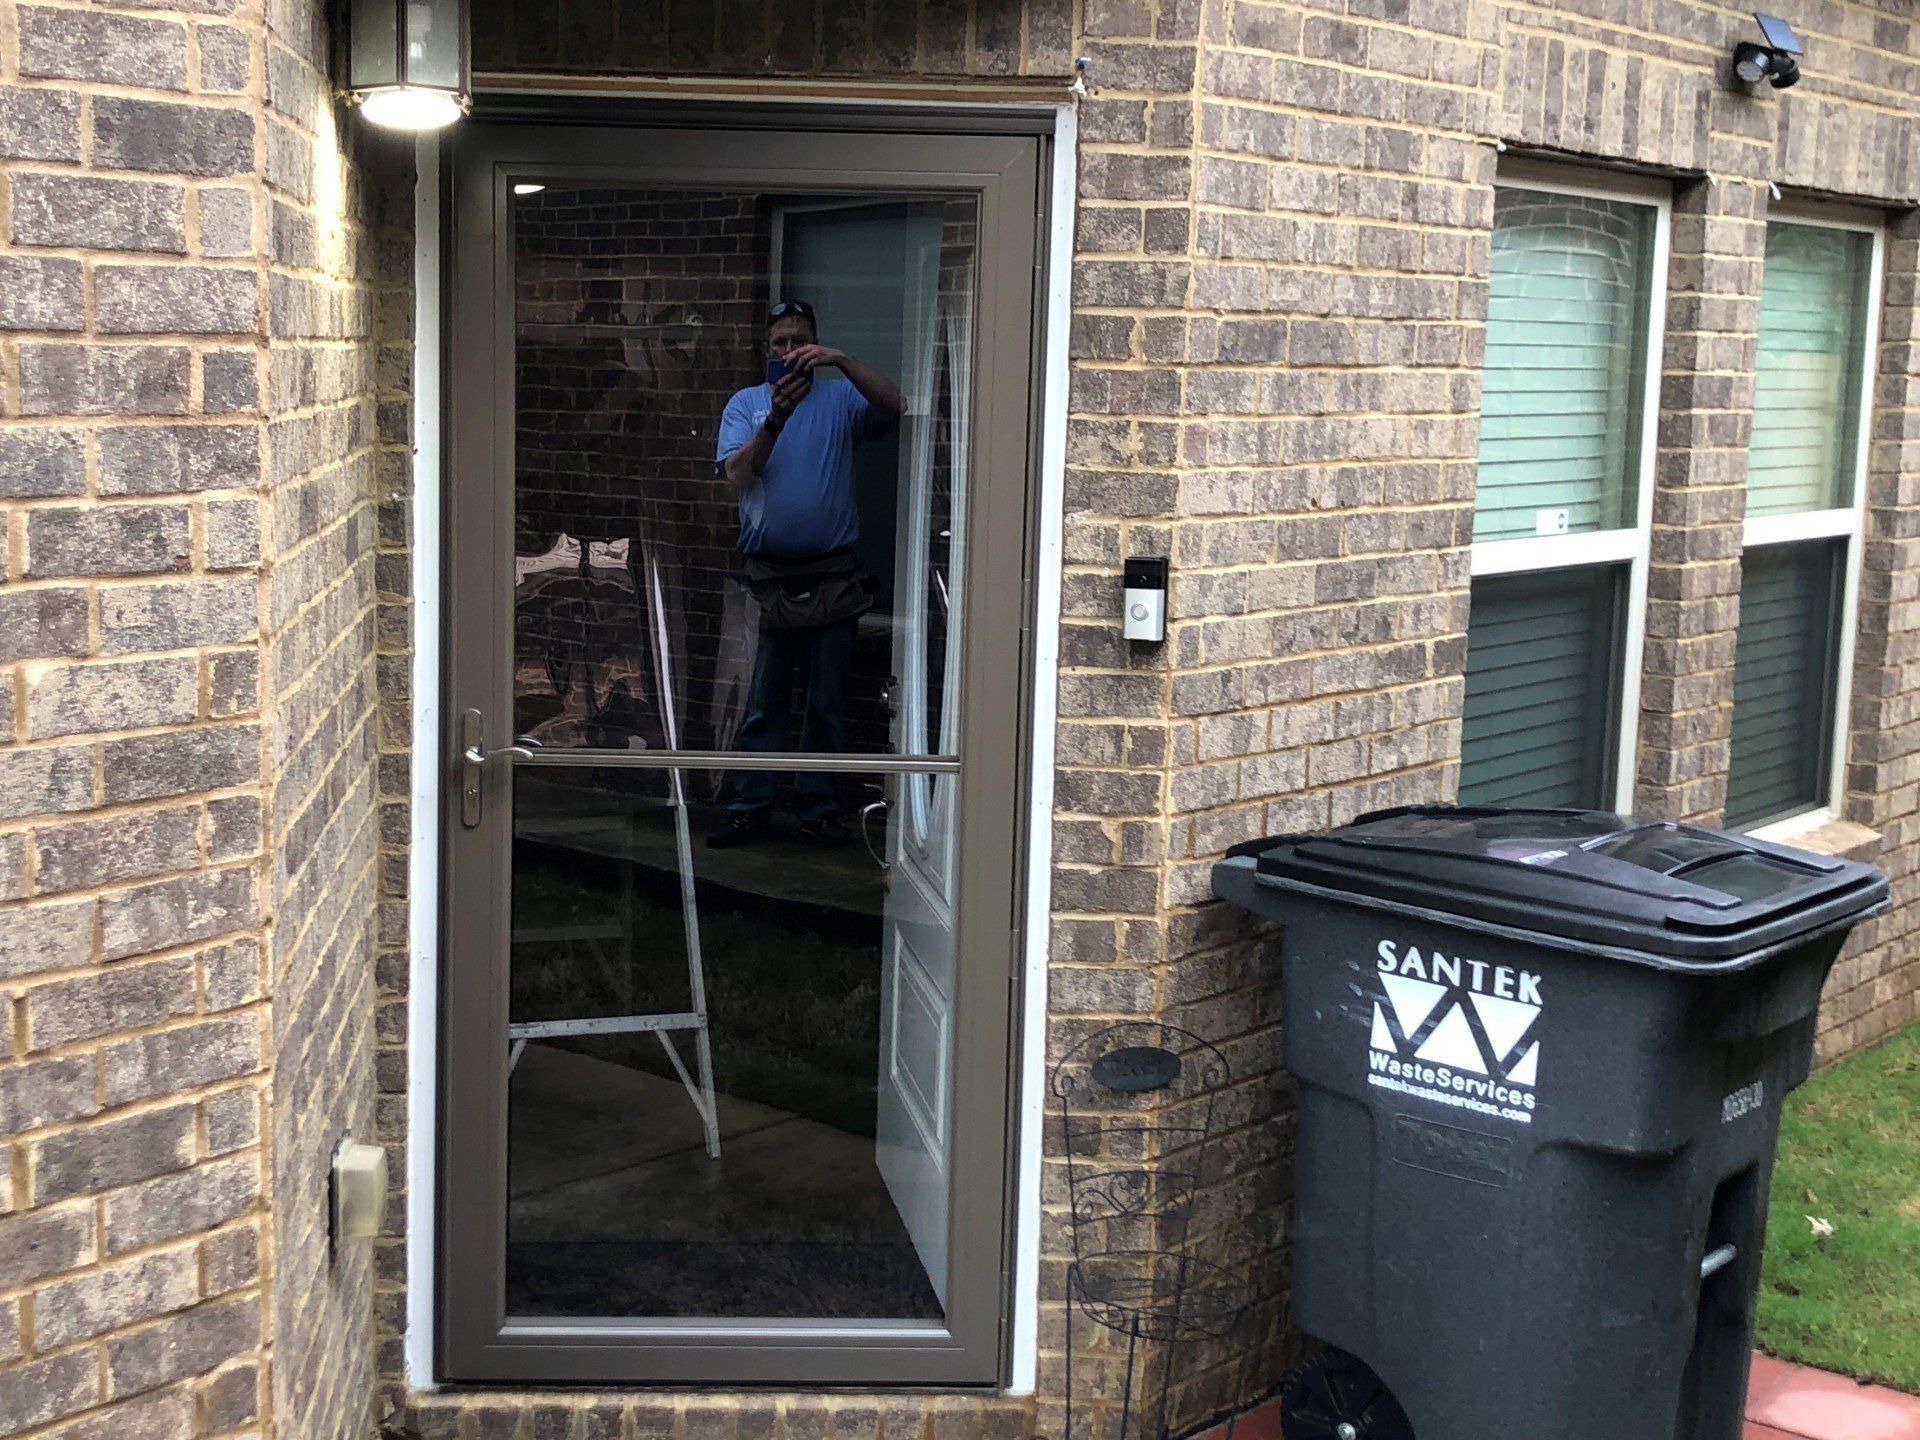 Privacy tint installed in Hoover AL on 2.15.2020 - Many solar protective film options offer privacy and style in Hoover AL